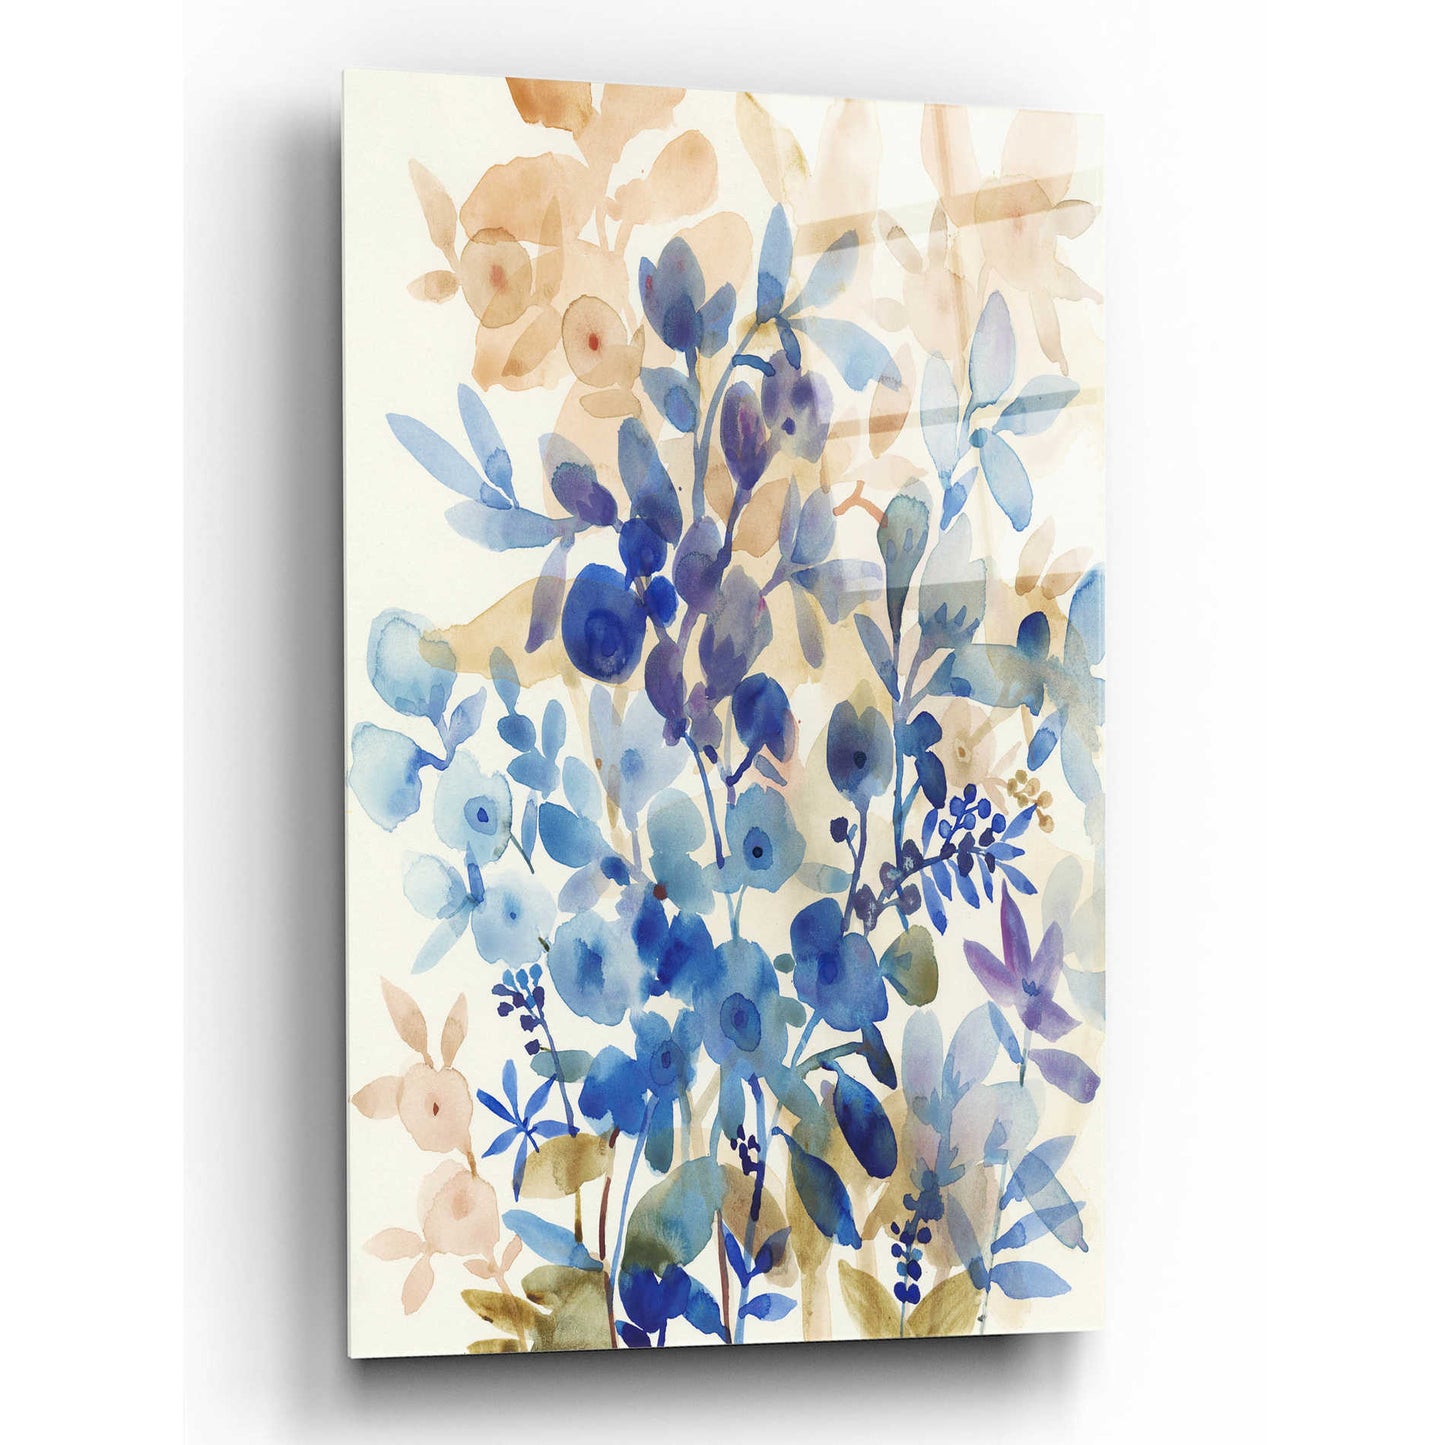 Epic Art 'Blueberry Floral I' by Tim O'Toole, Acrylic Glass Wall Art,16x24